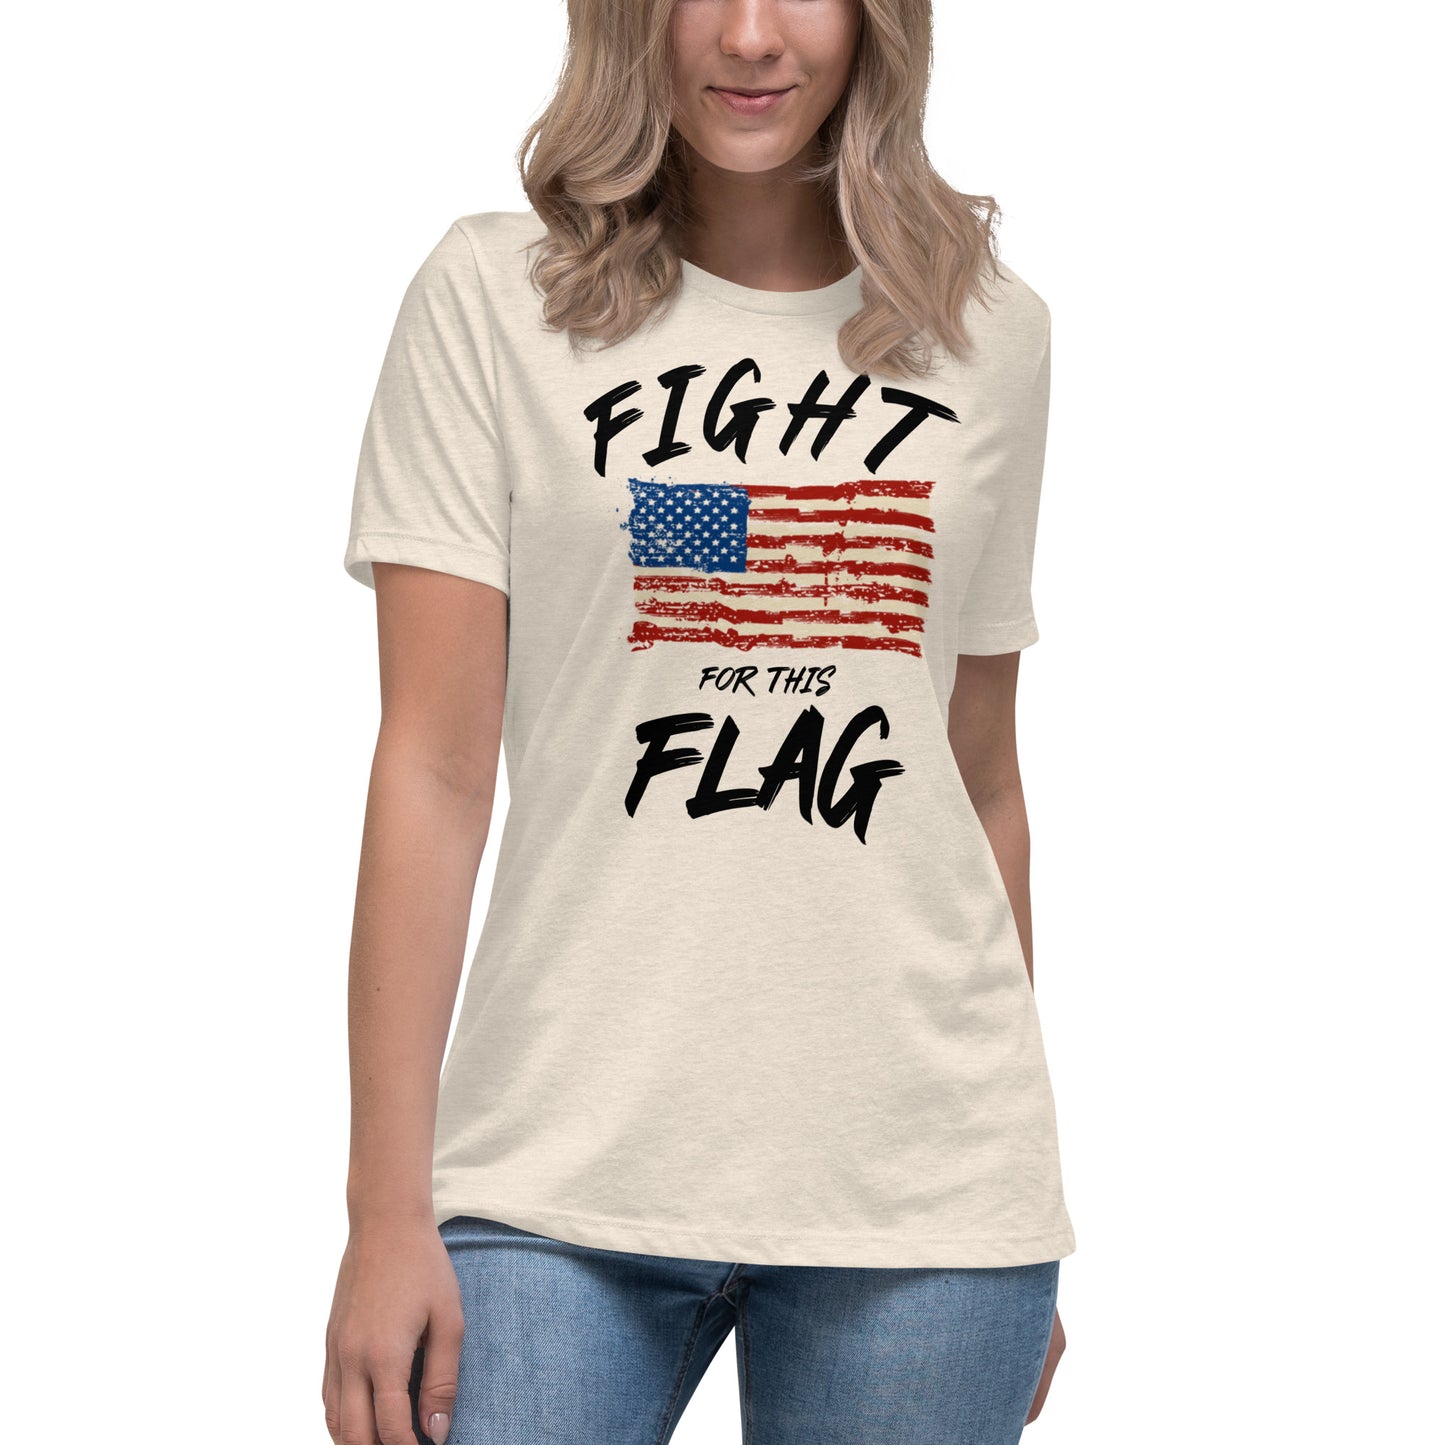 Fight for this Flag women's tee (black lettering)